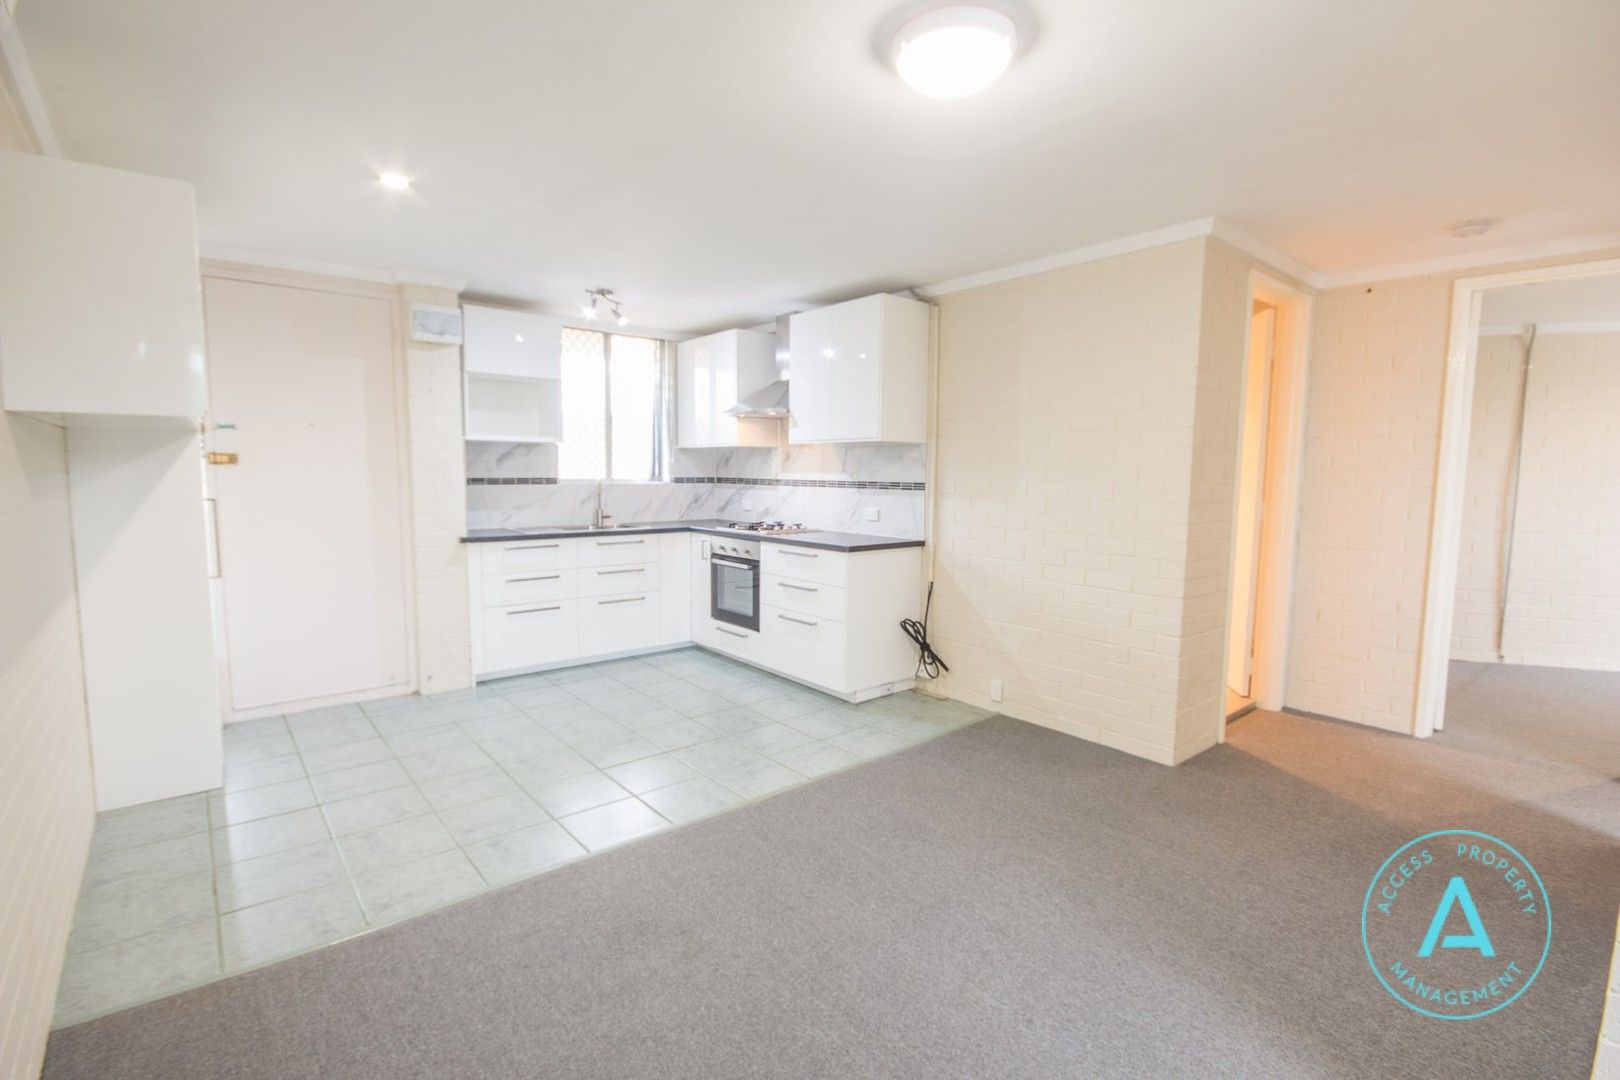 2 bedrooms Apartment / Unit / Flat in 72/81 King William Street BAYSWATER WA, 6053